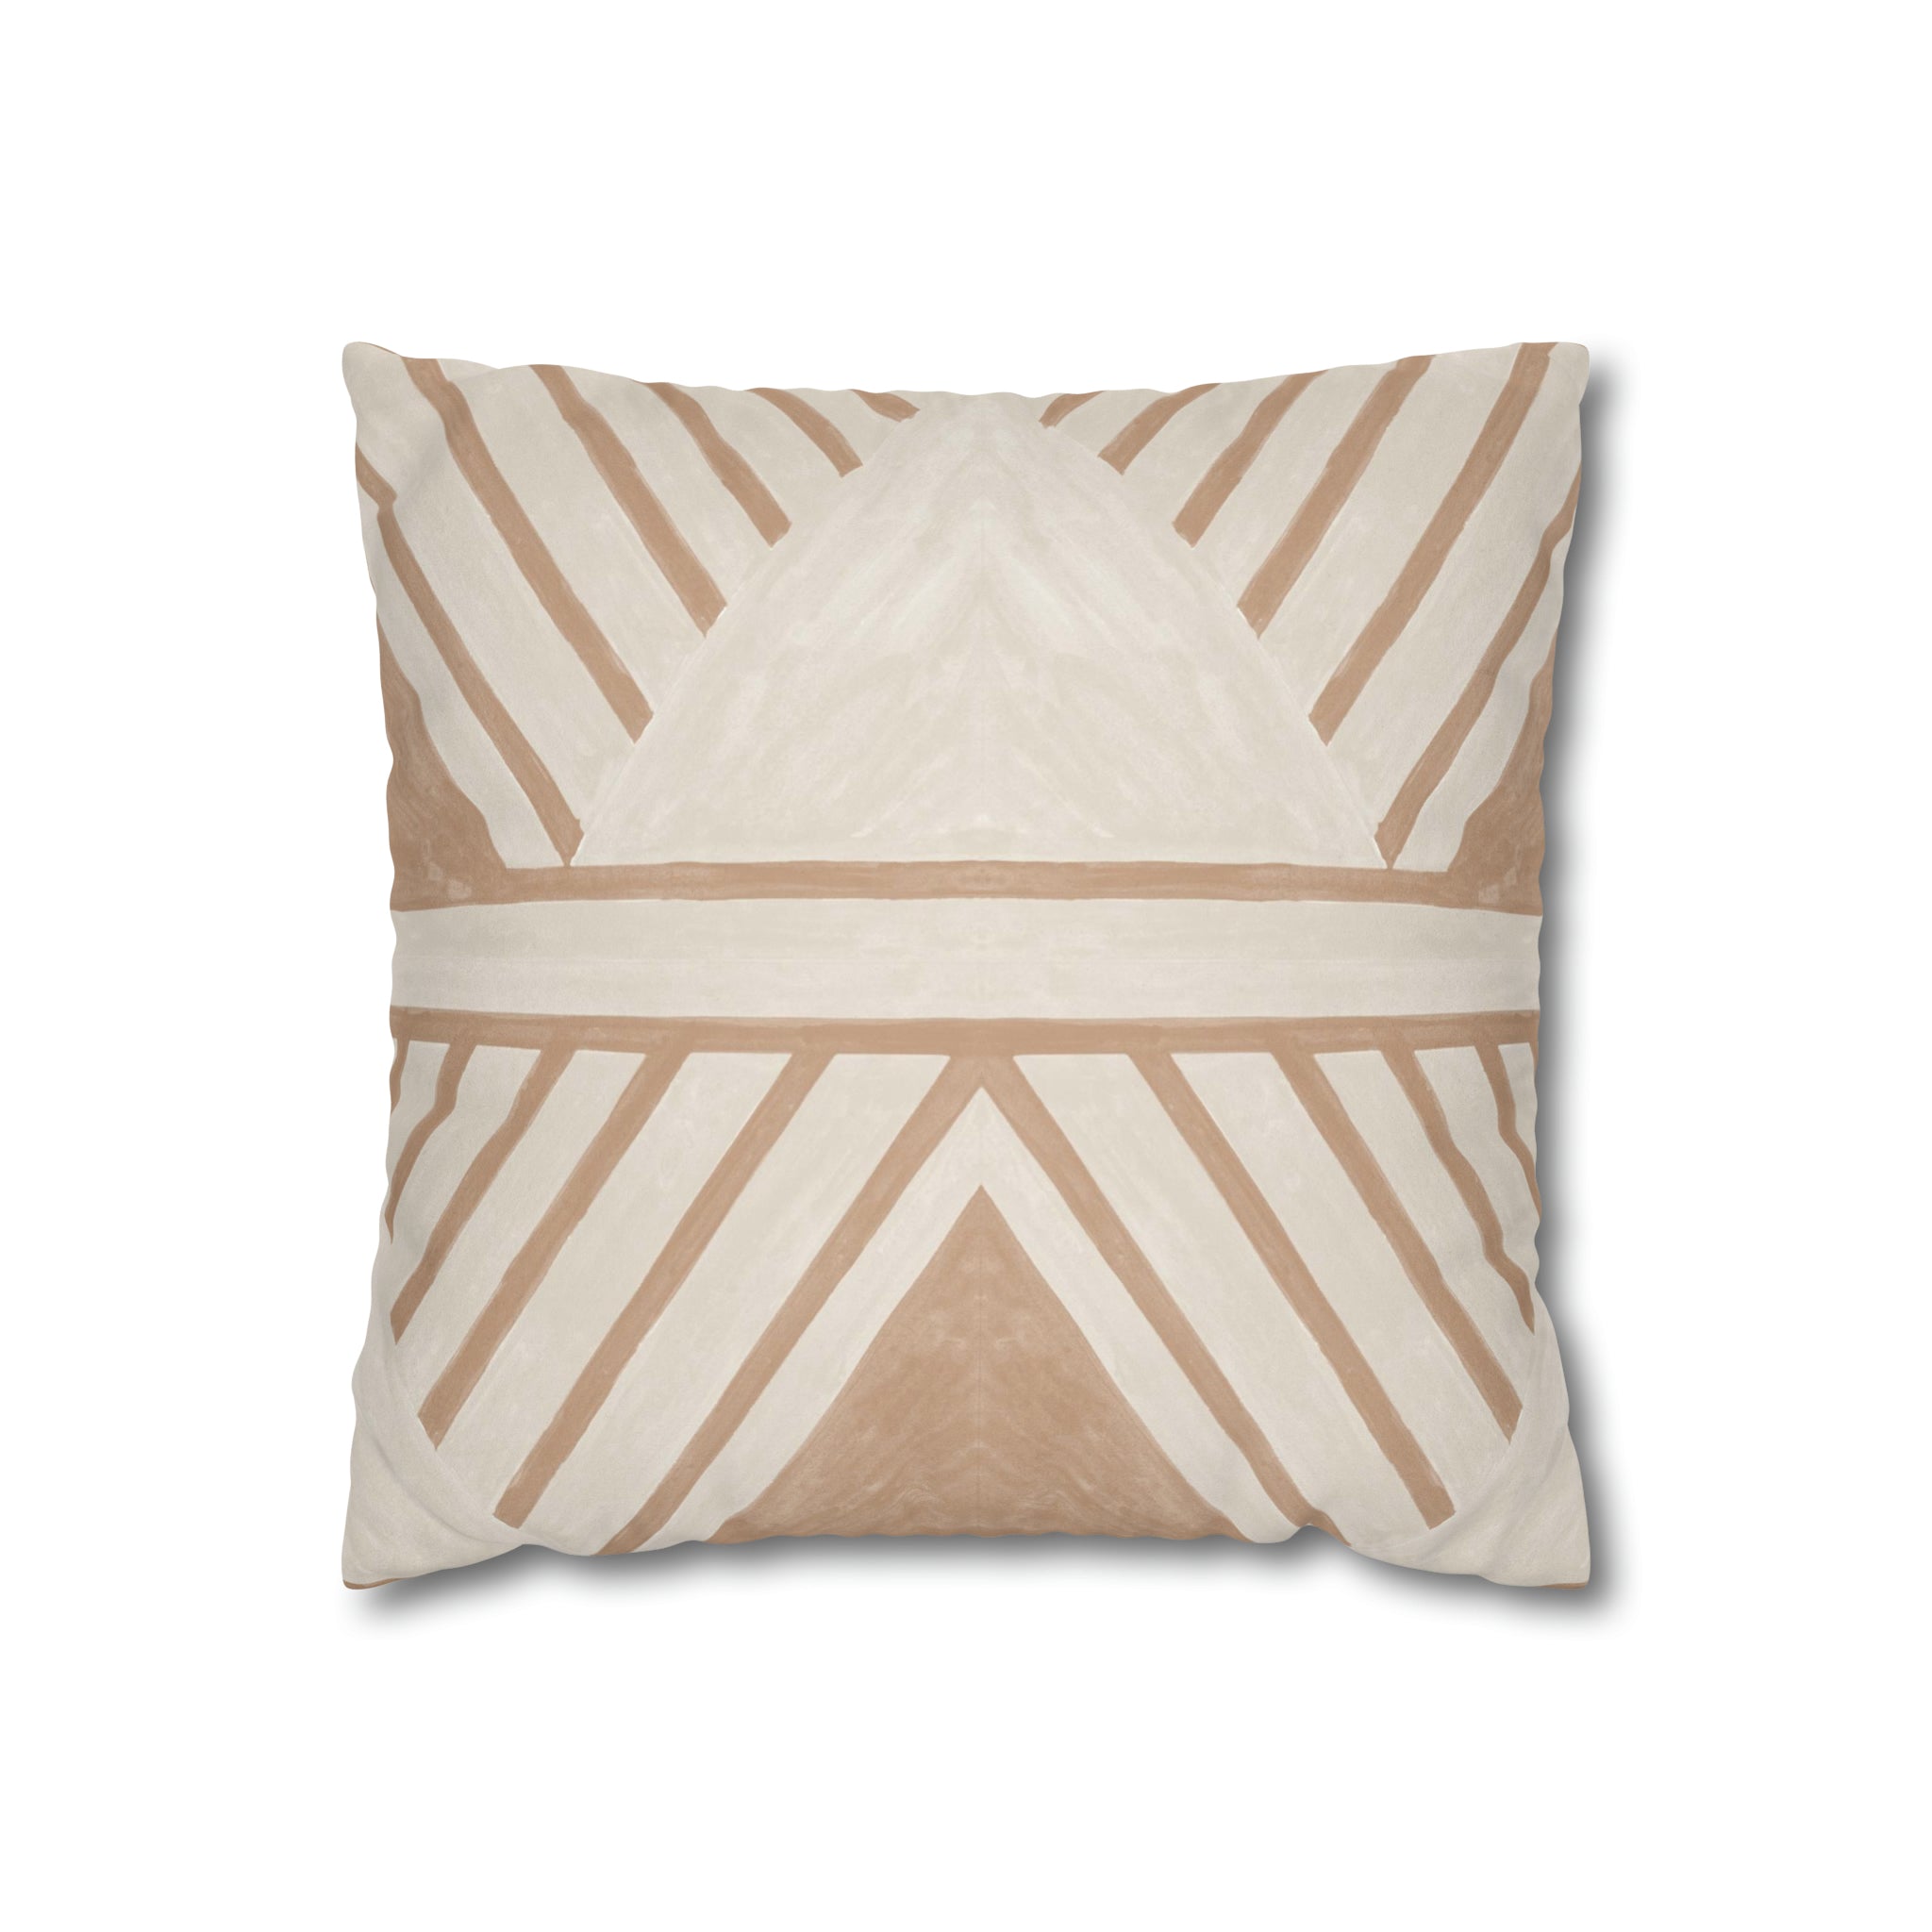 Shaman Microsuede Square Pillow Cover